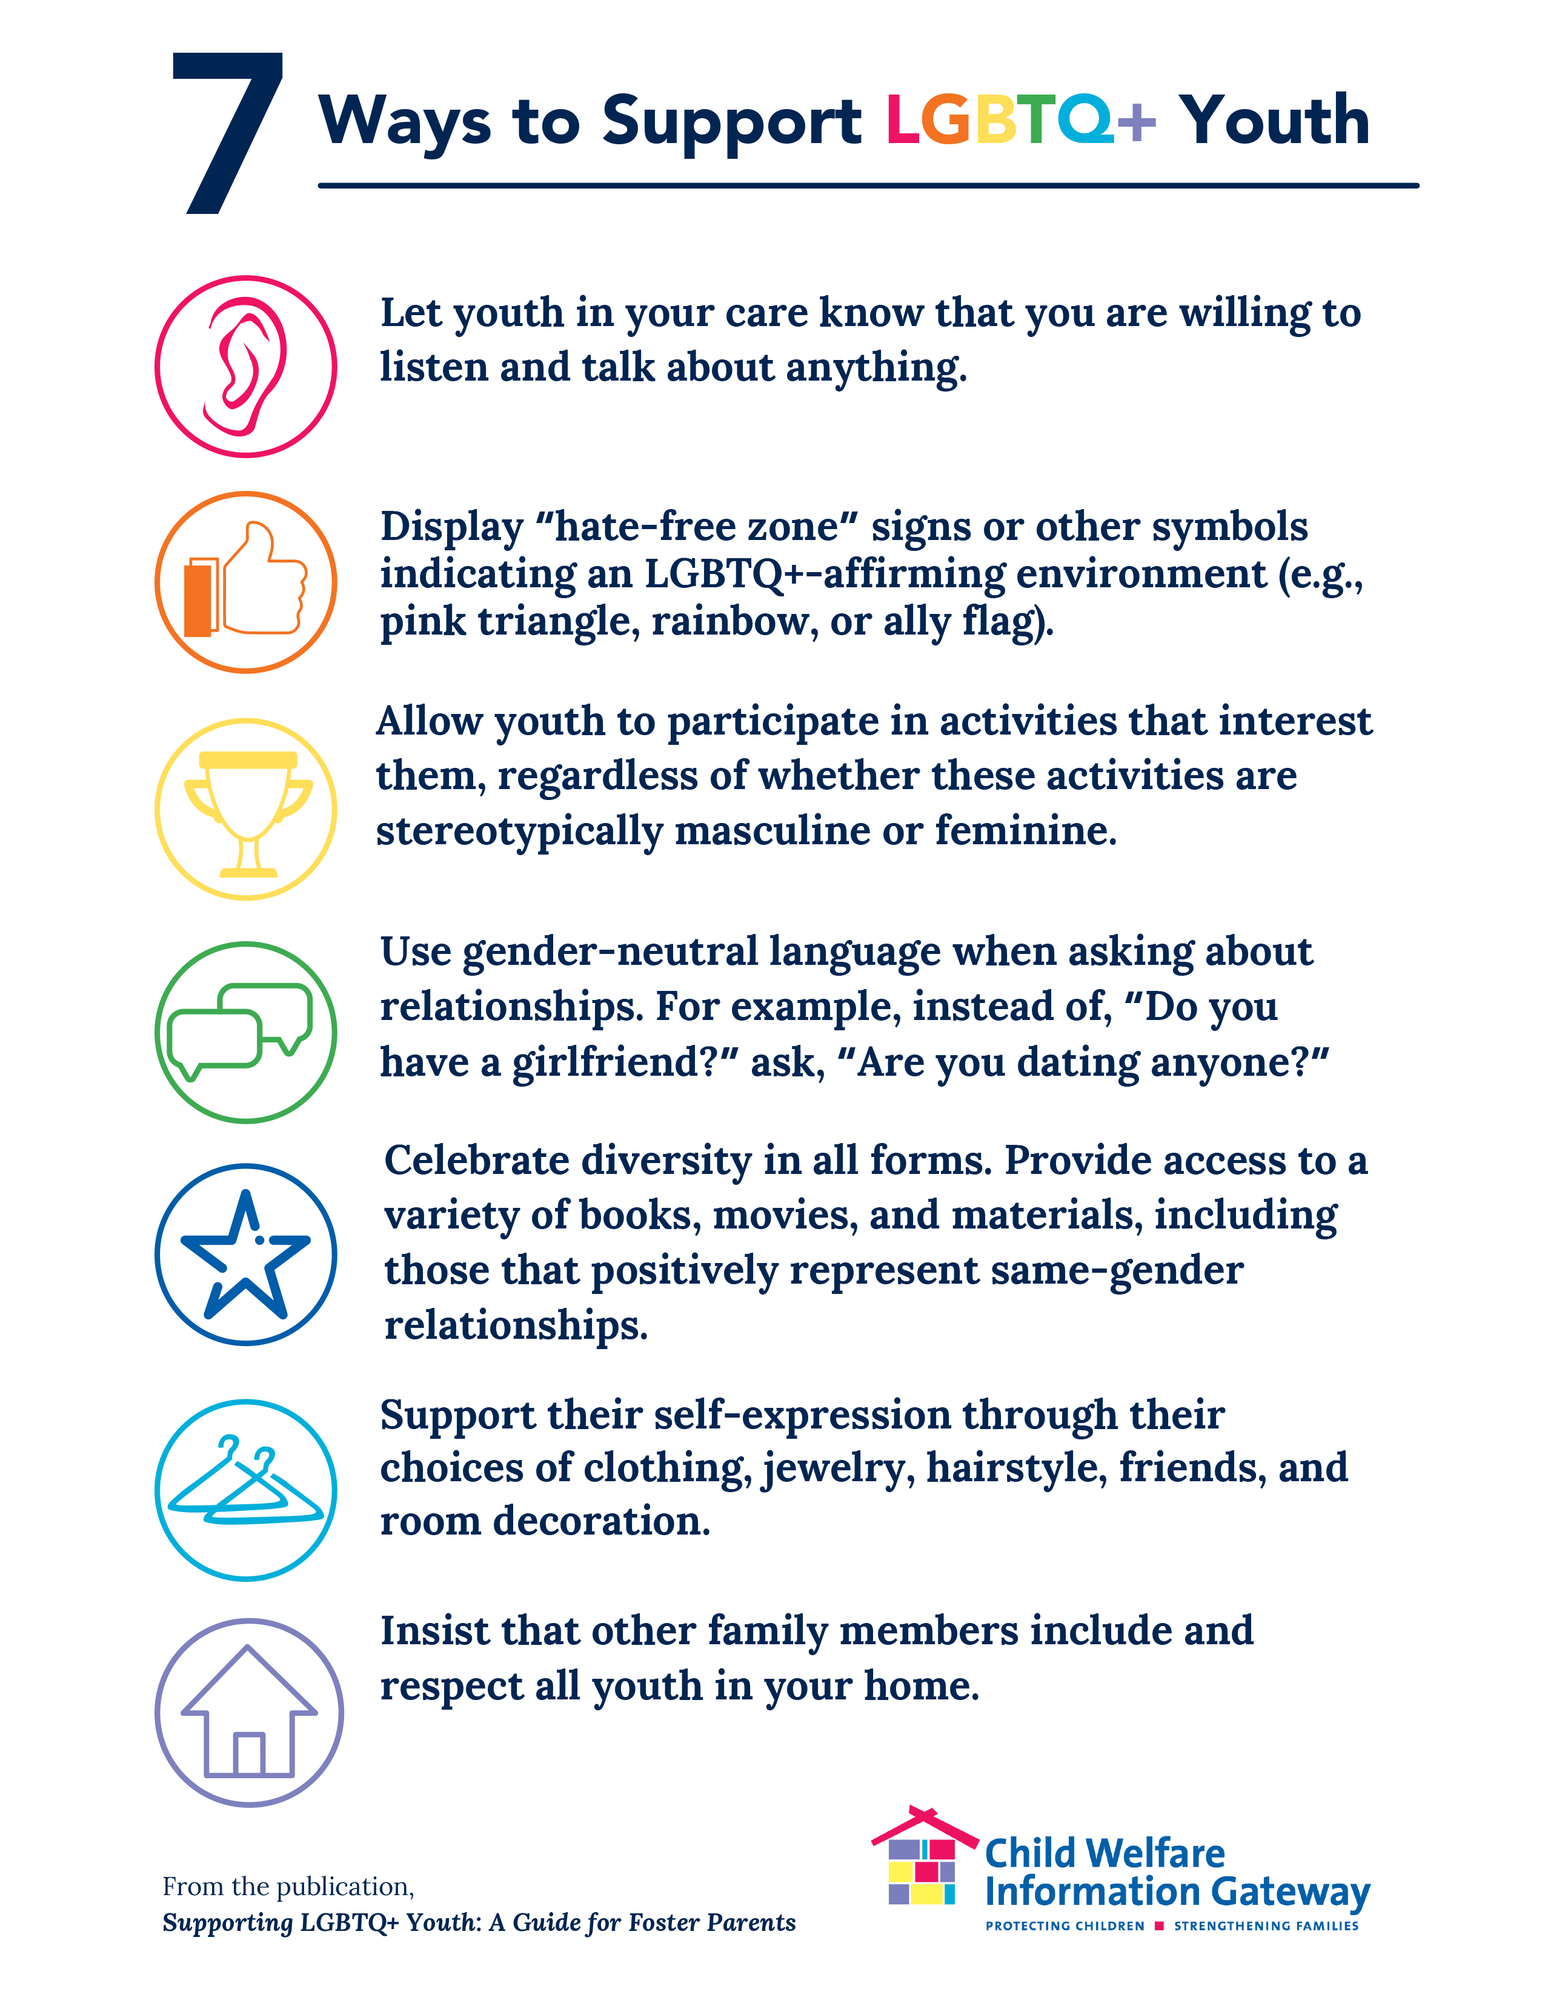 7 Ways to Support LGBTQ+ Youth